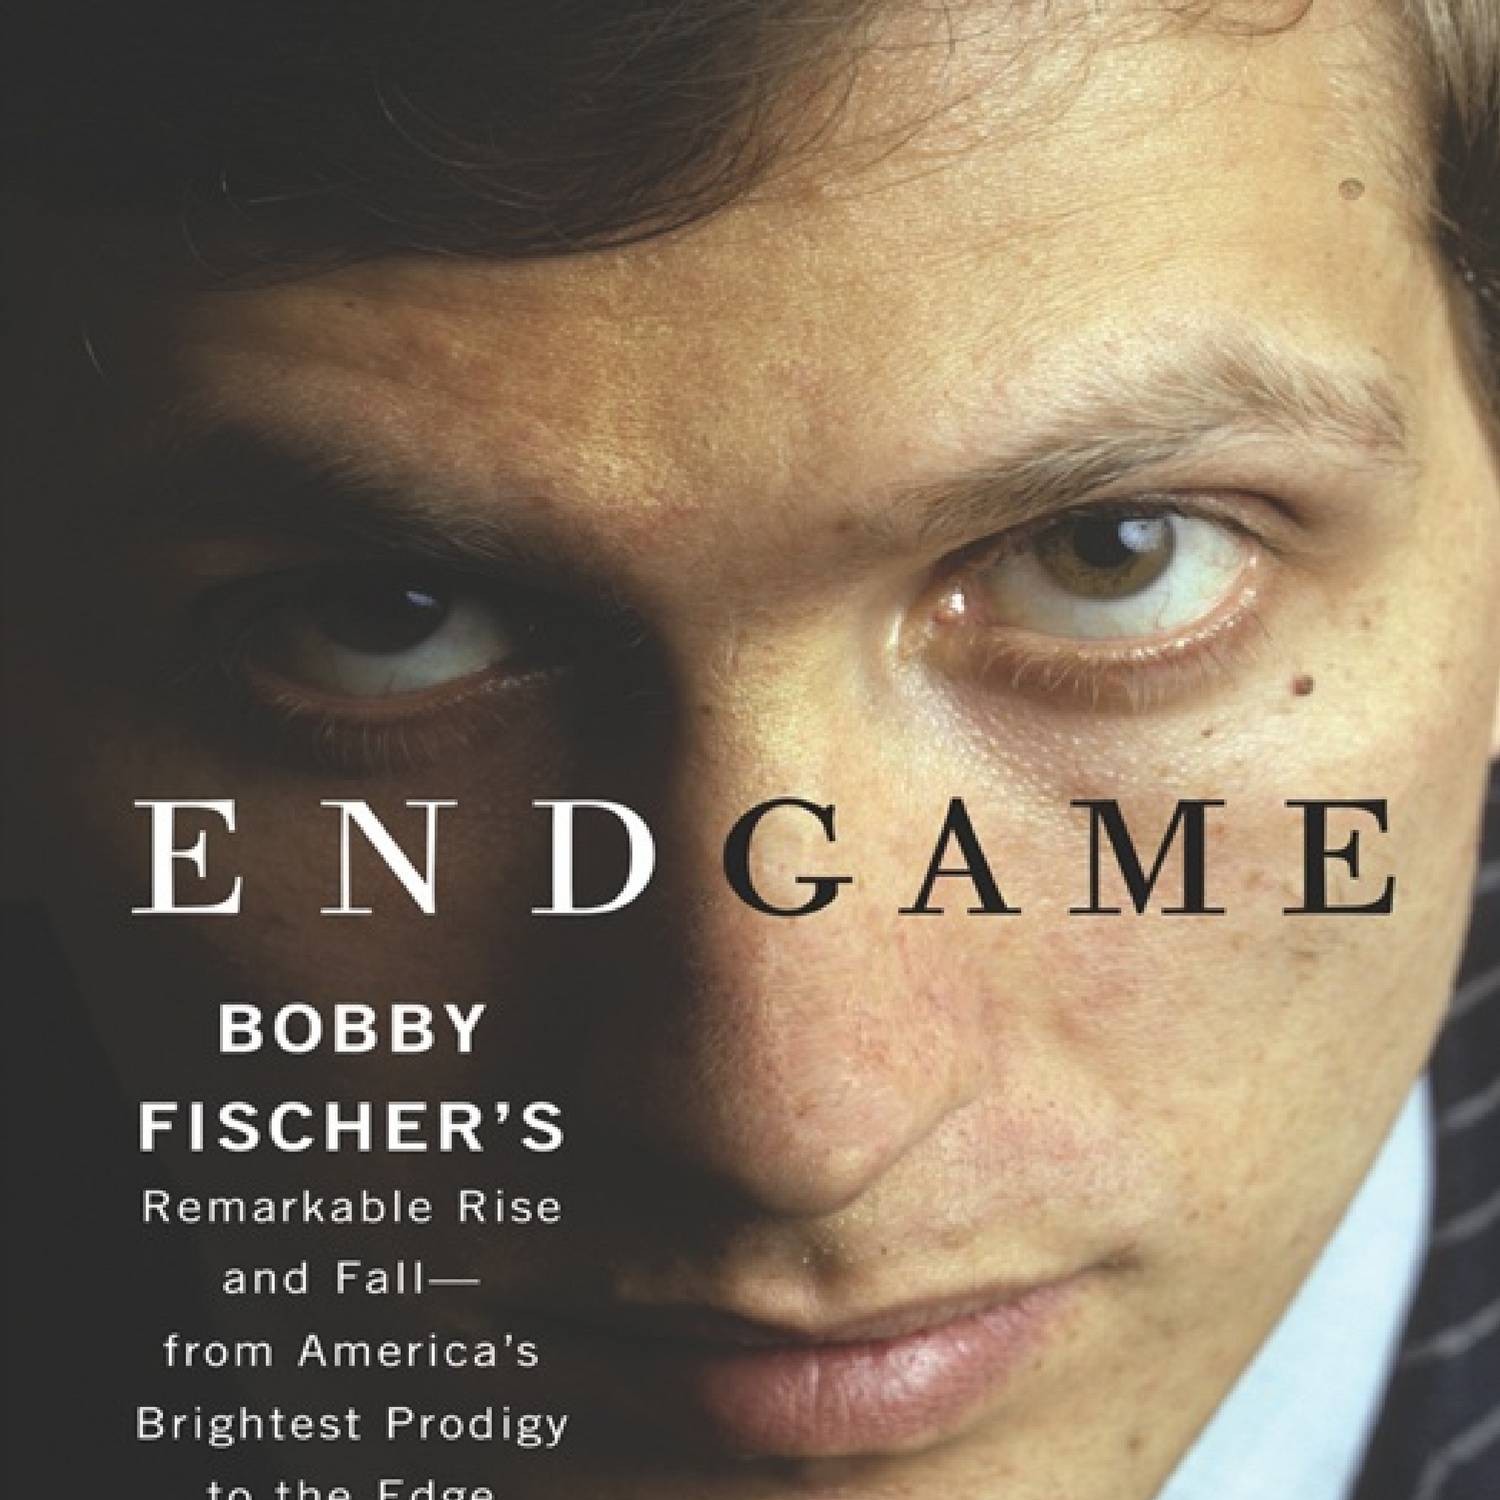 Endgame: The Spectacular Rise and Fall of Bobby Fischer by Frank Brady:  review